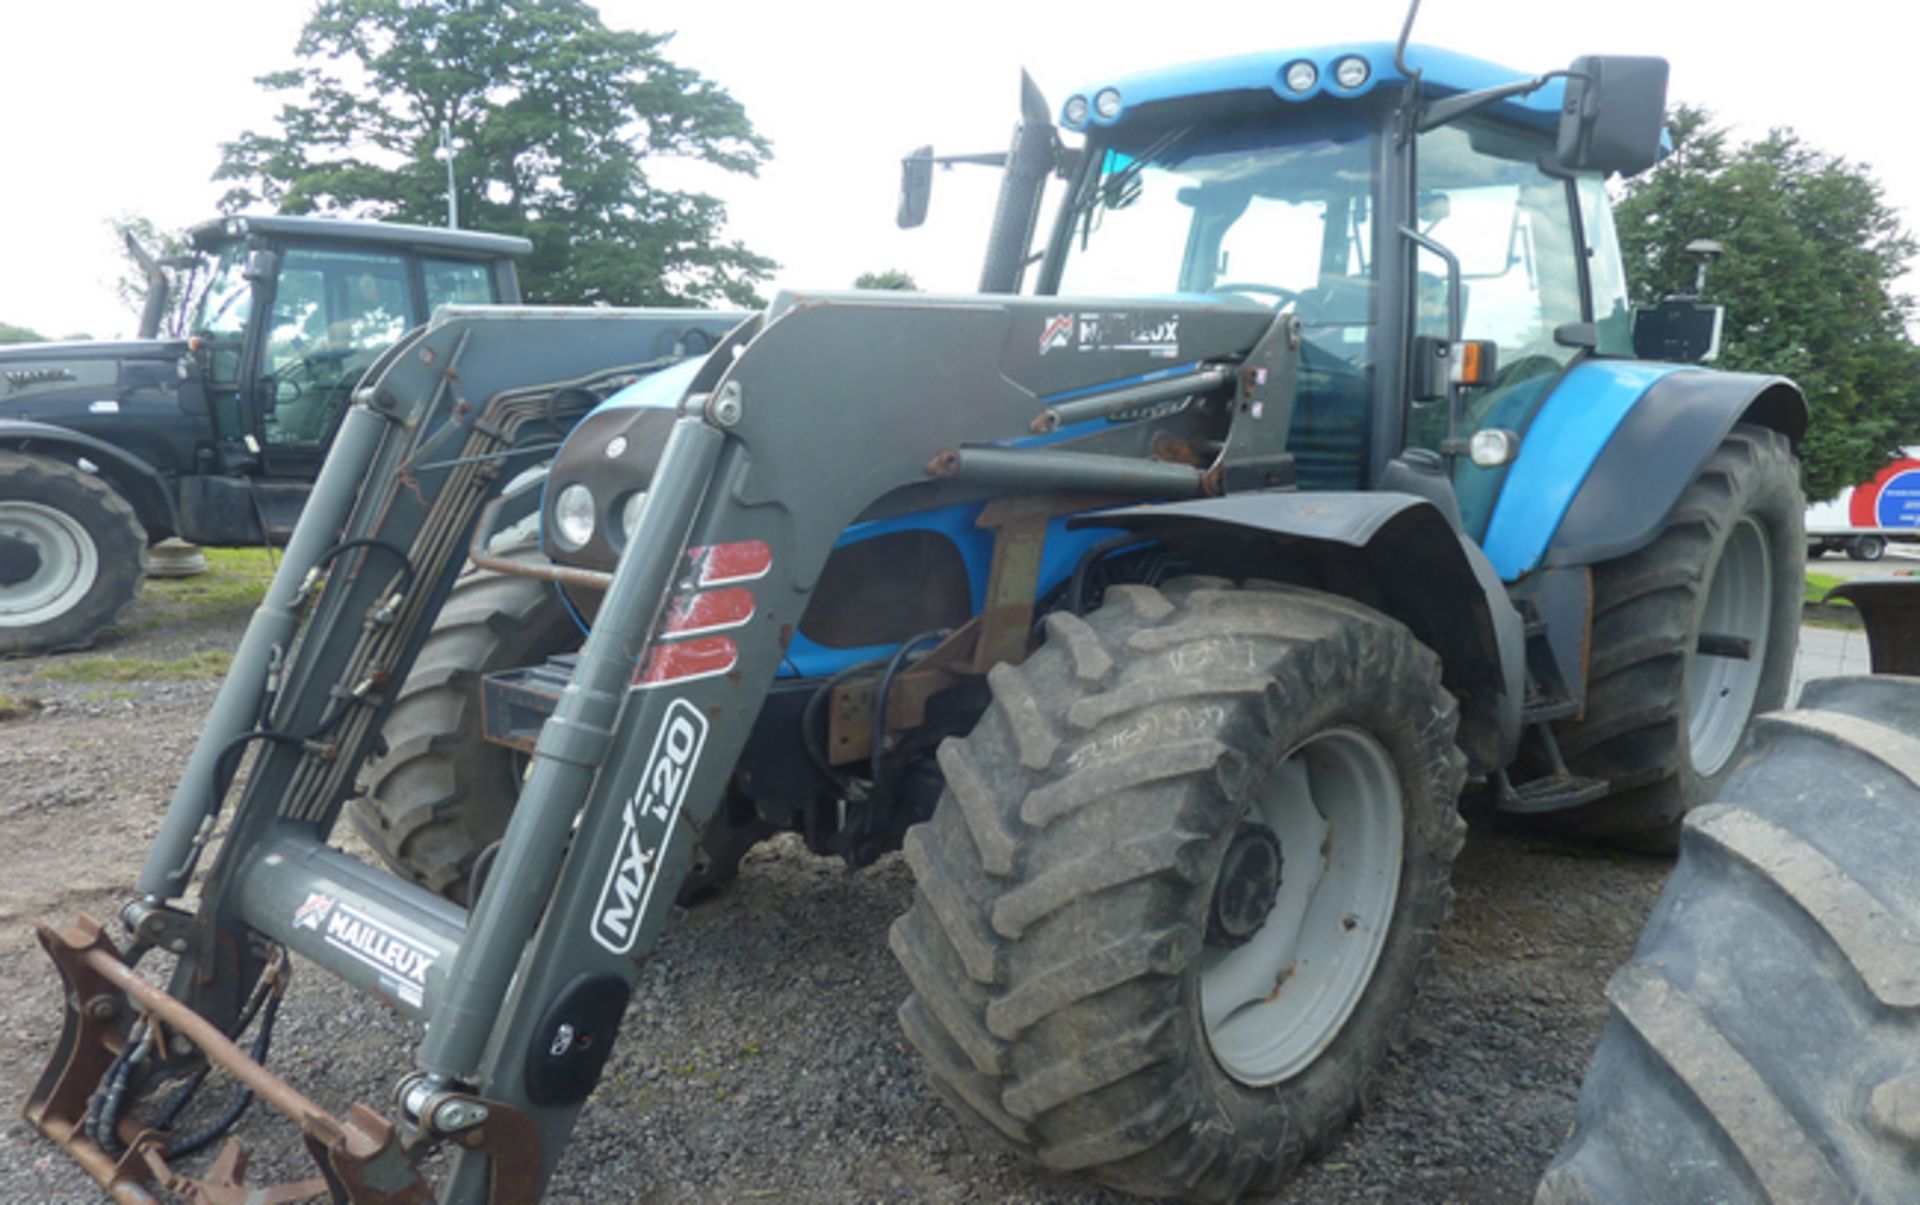 5216 Landini 145 Landpower tractor, 50k box, on air brakes, 2007, 2500 hours, c/w loader, YX57 ACZ - Image 3 of 3